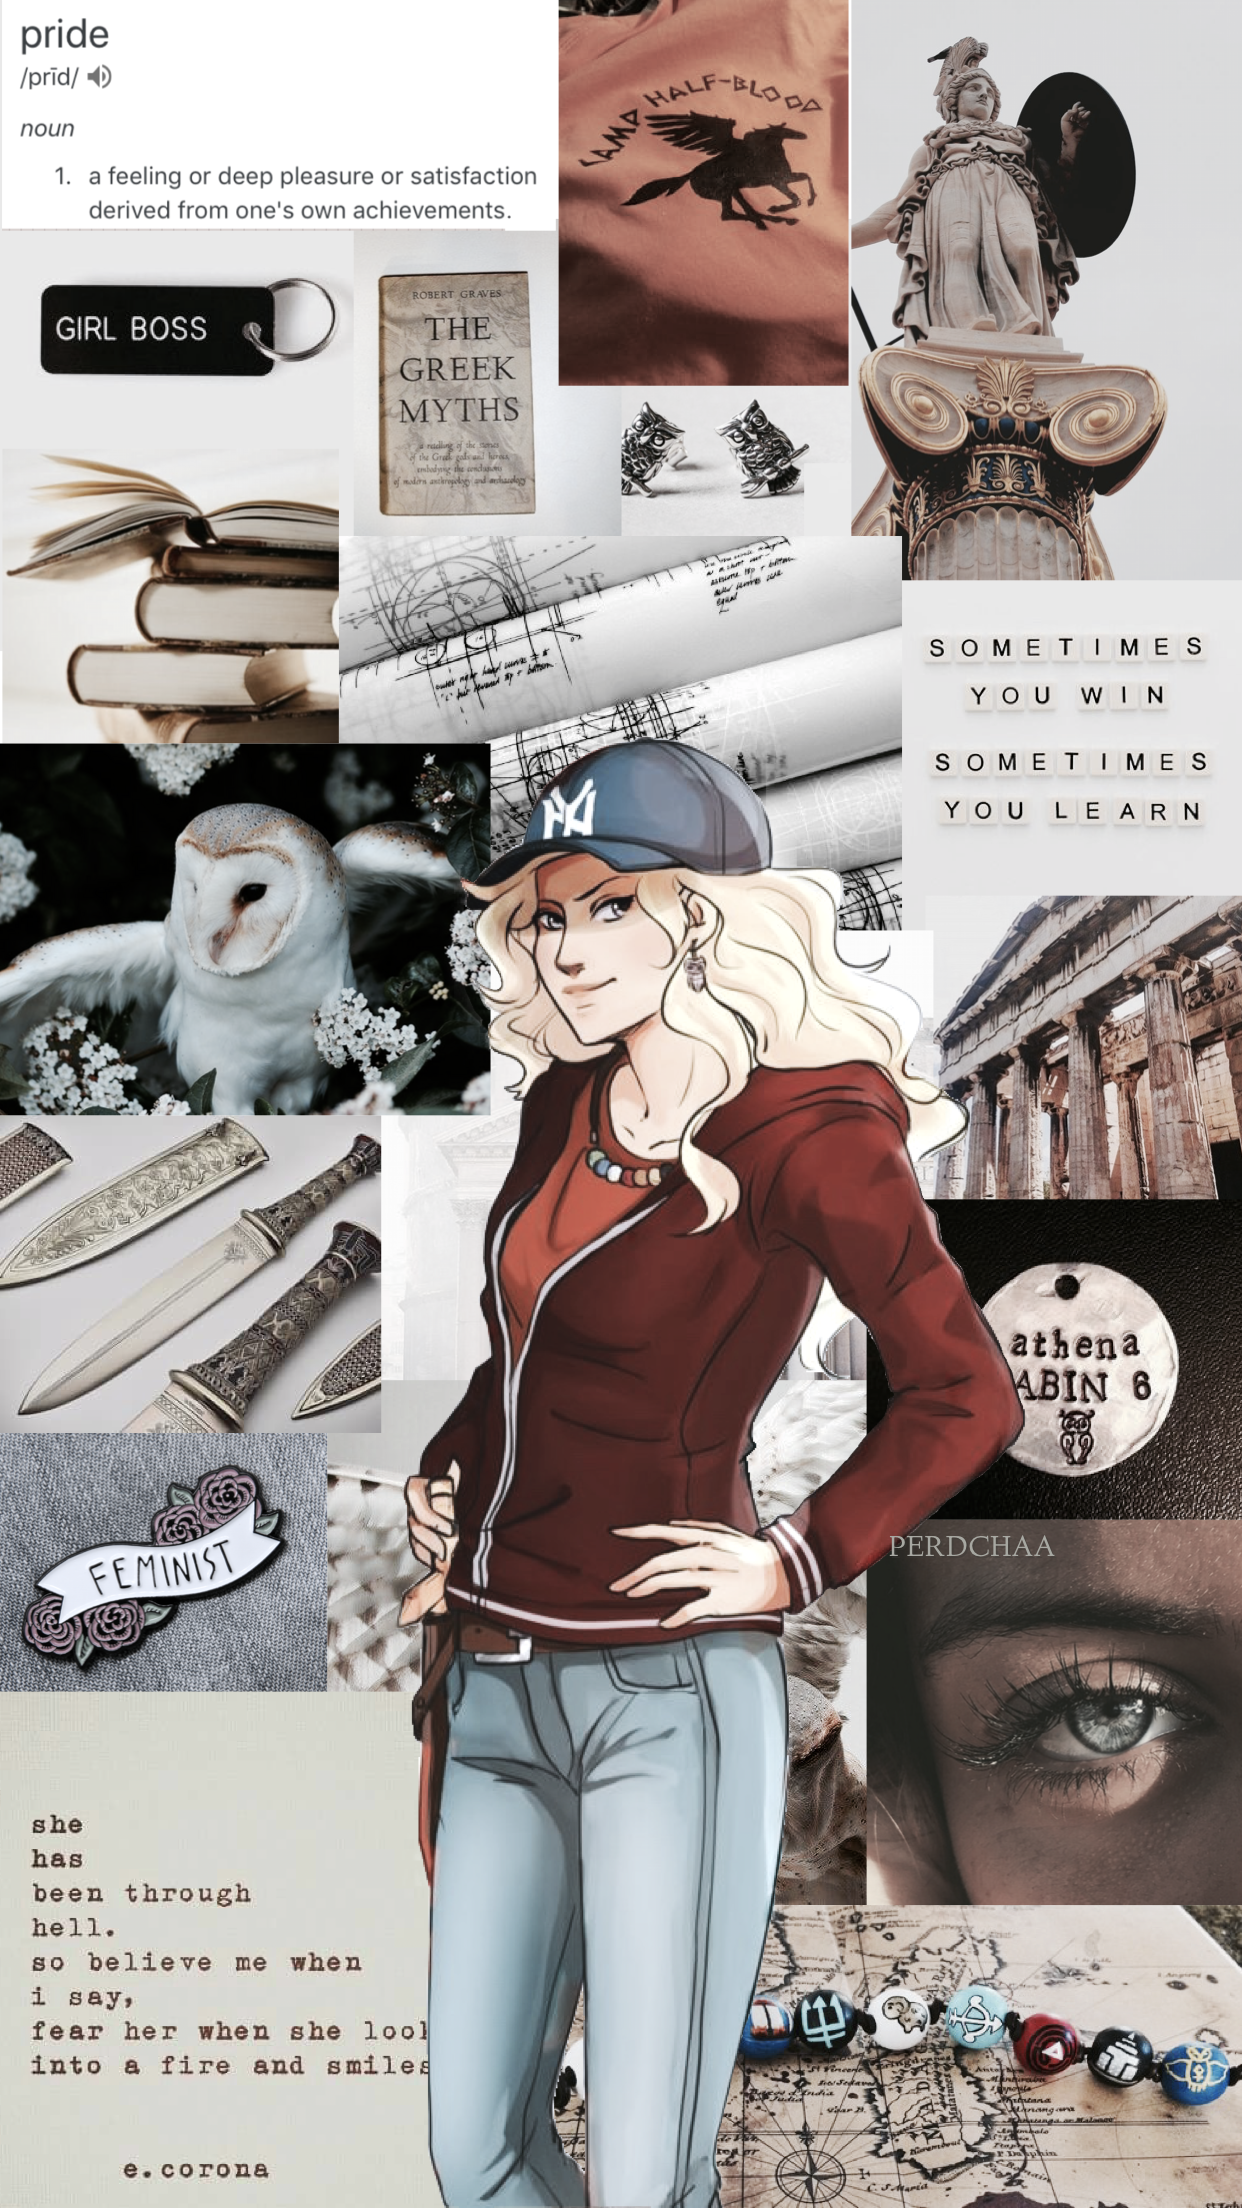 Annabeth Chase Wallpapers